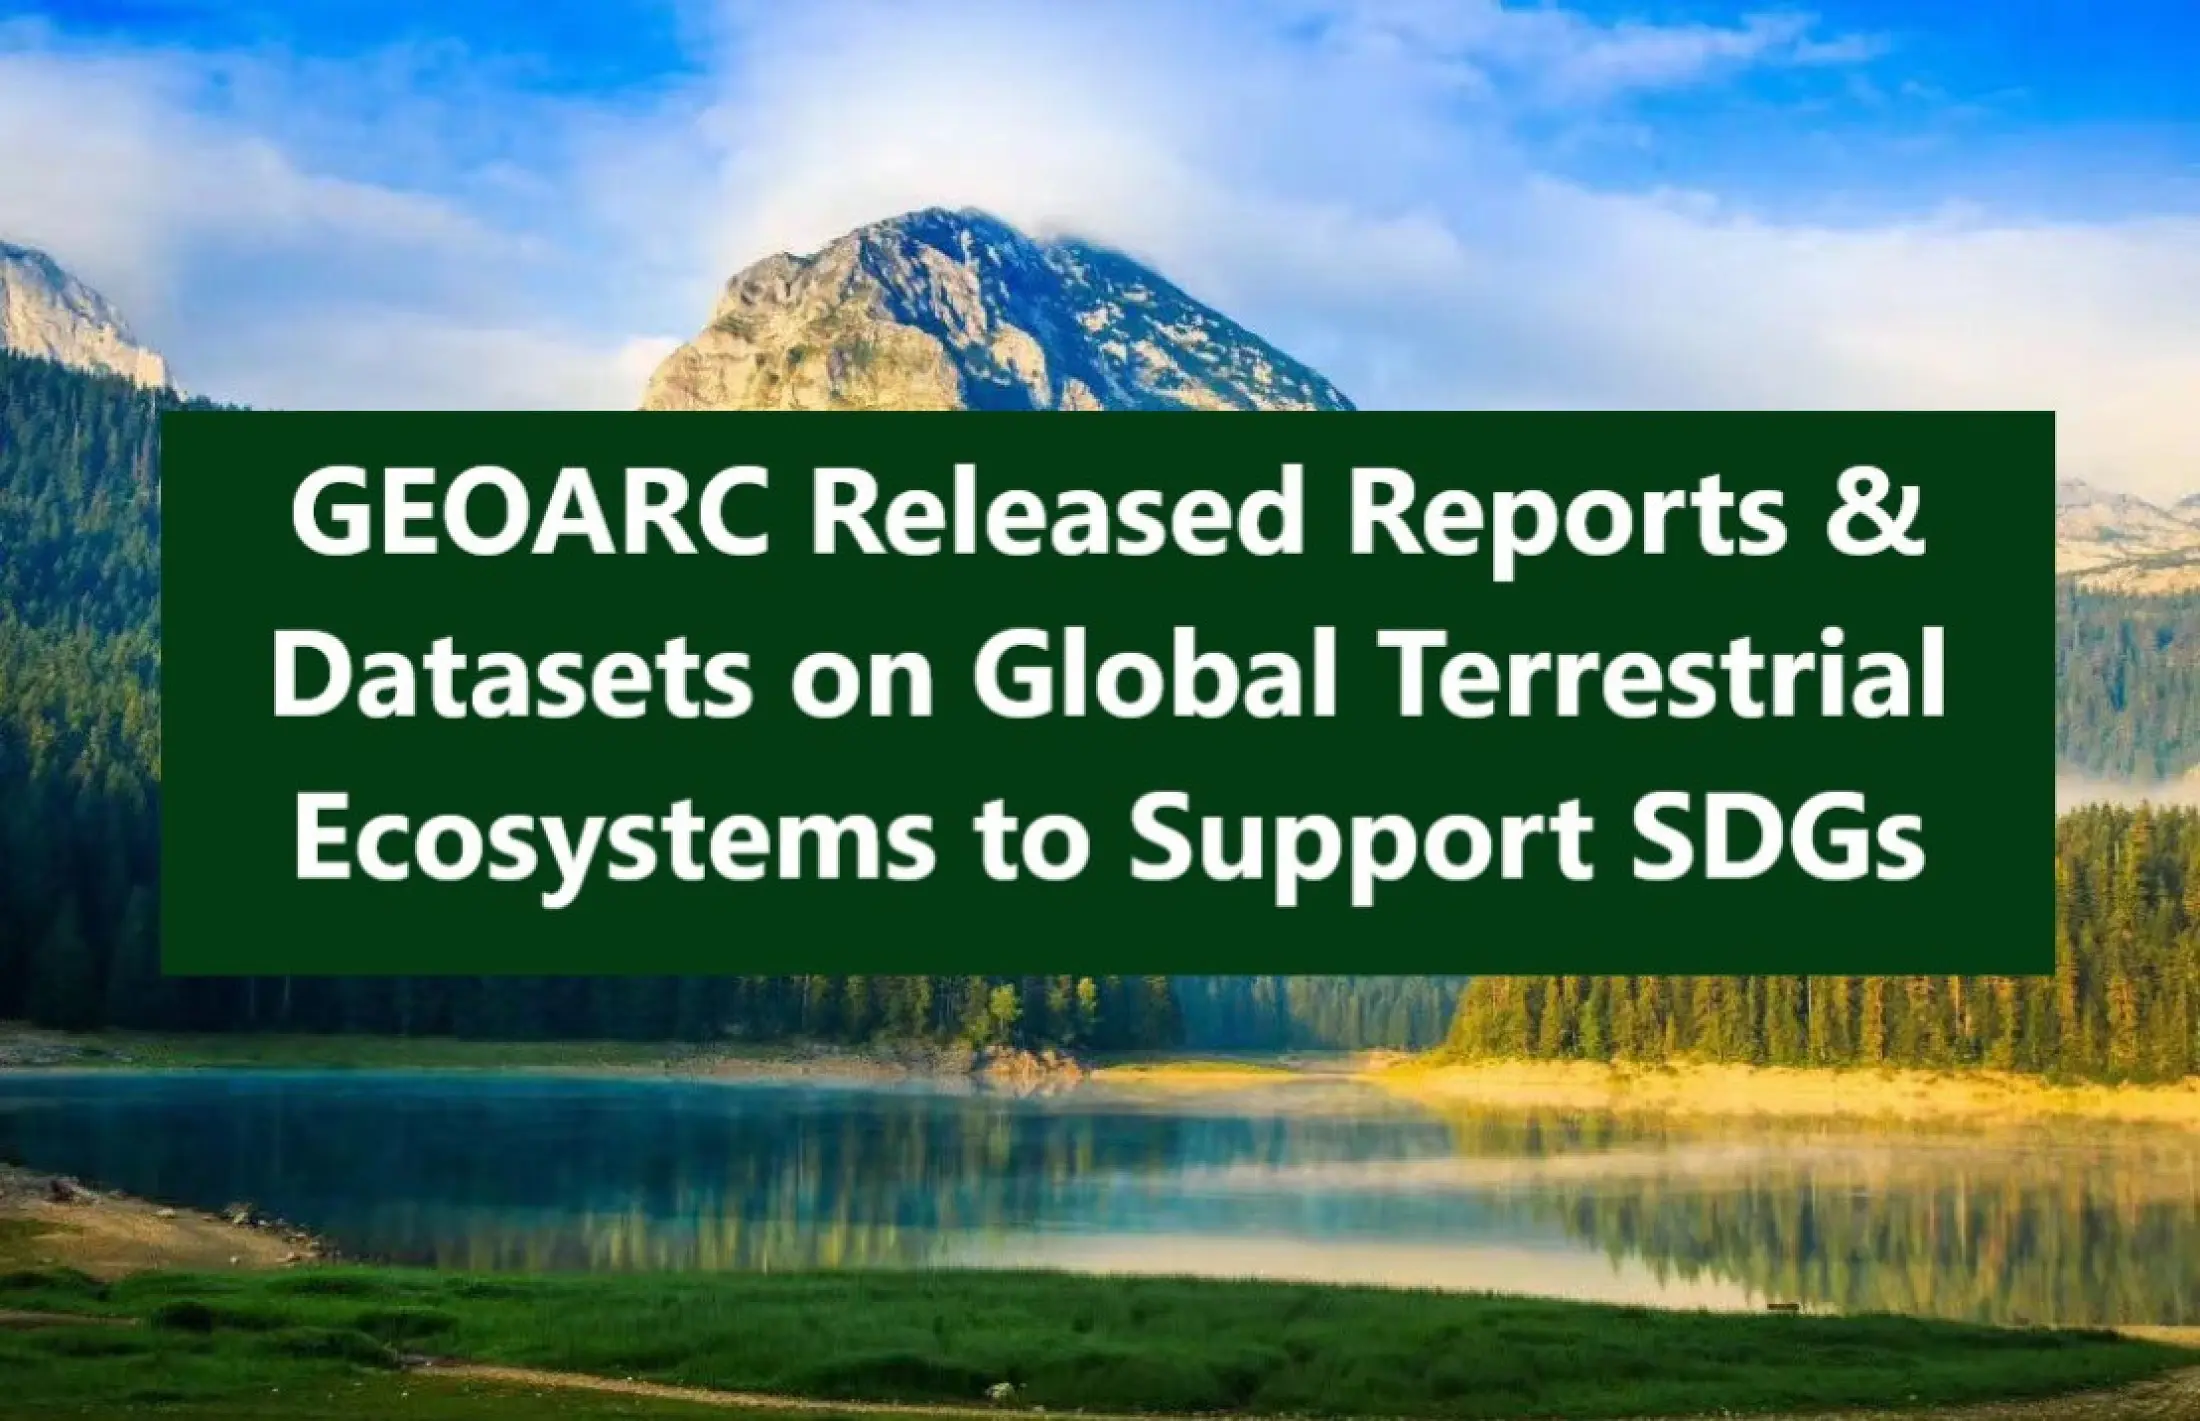 GEOARC Reports and Datasets Released on Global Terrestrial Ecosystems, Typical Lakes, Eurasian Grassland and Food Security to support Sustainable Development Goals